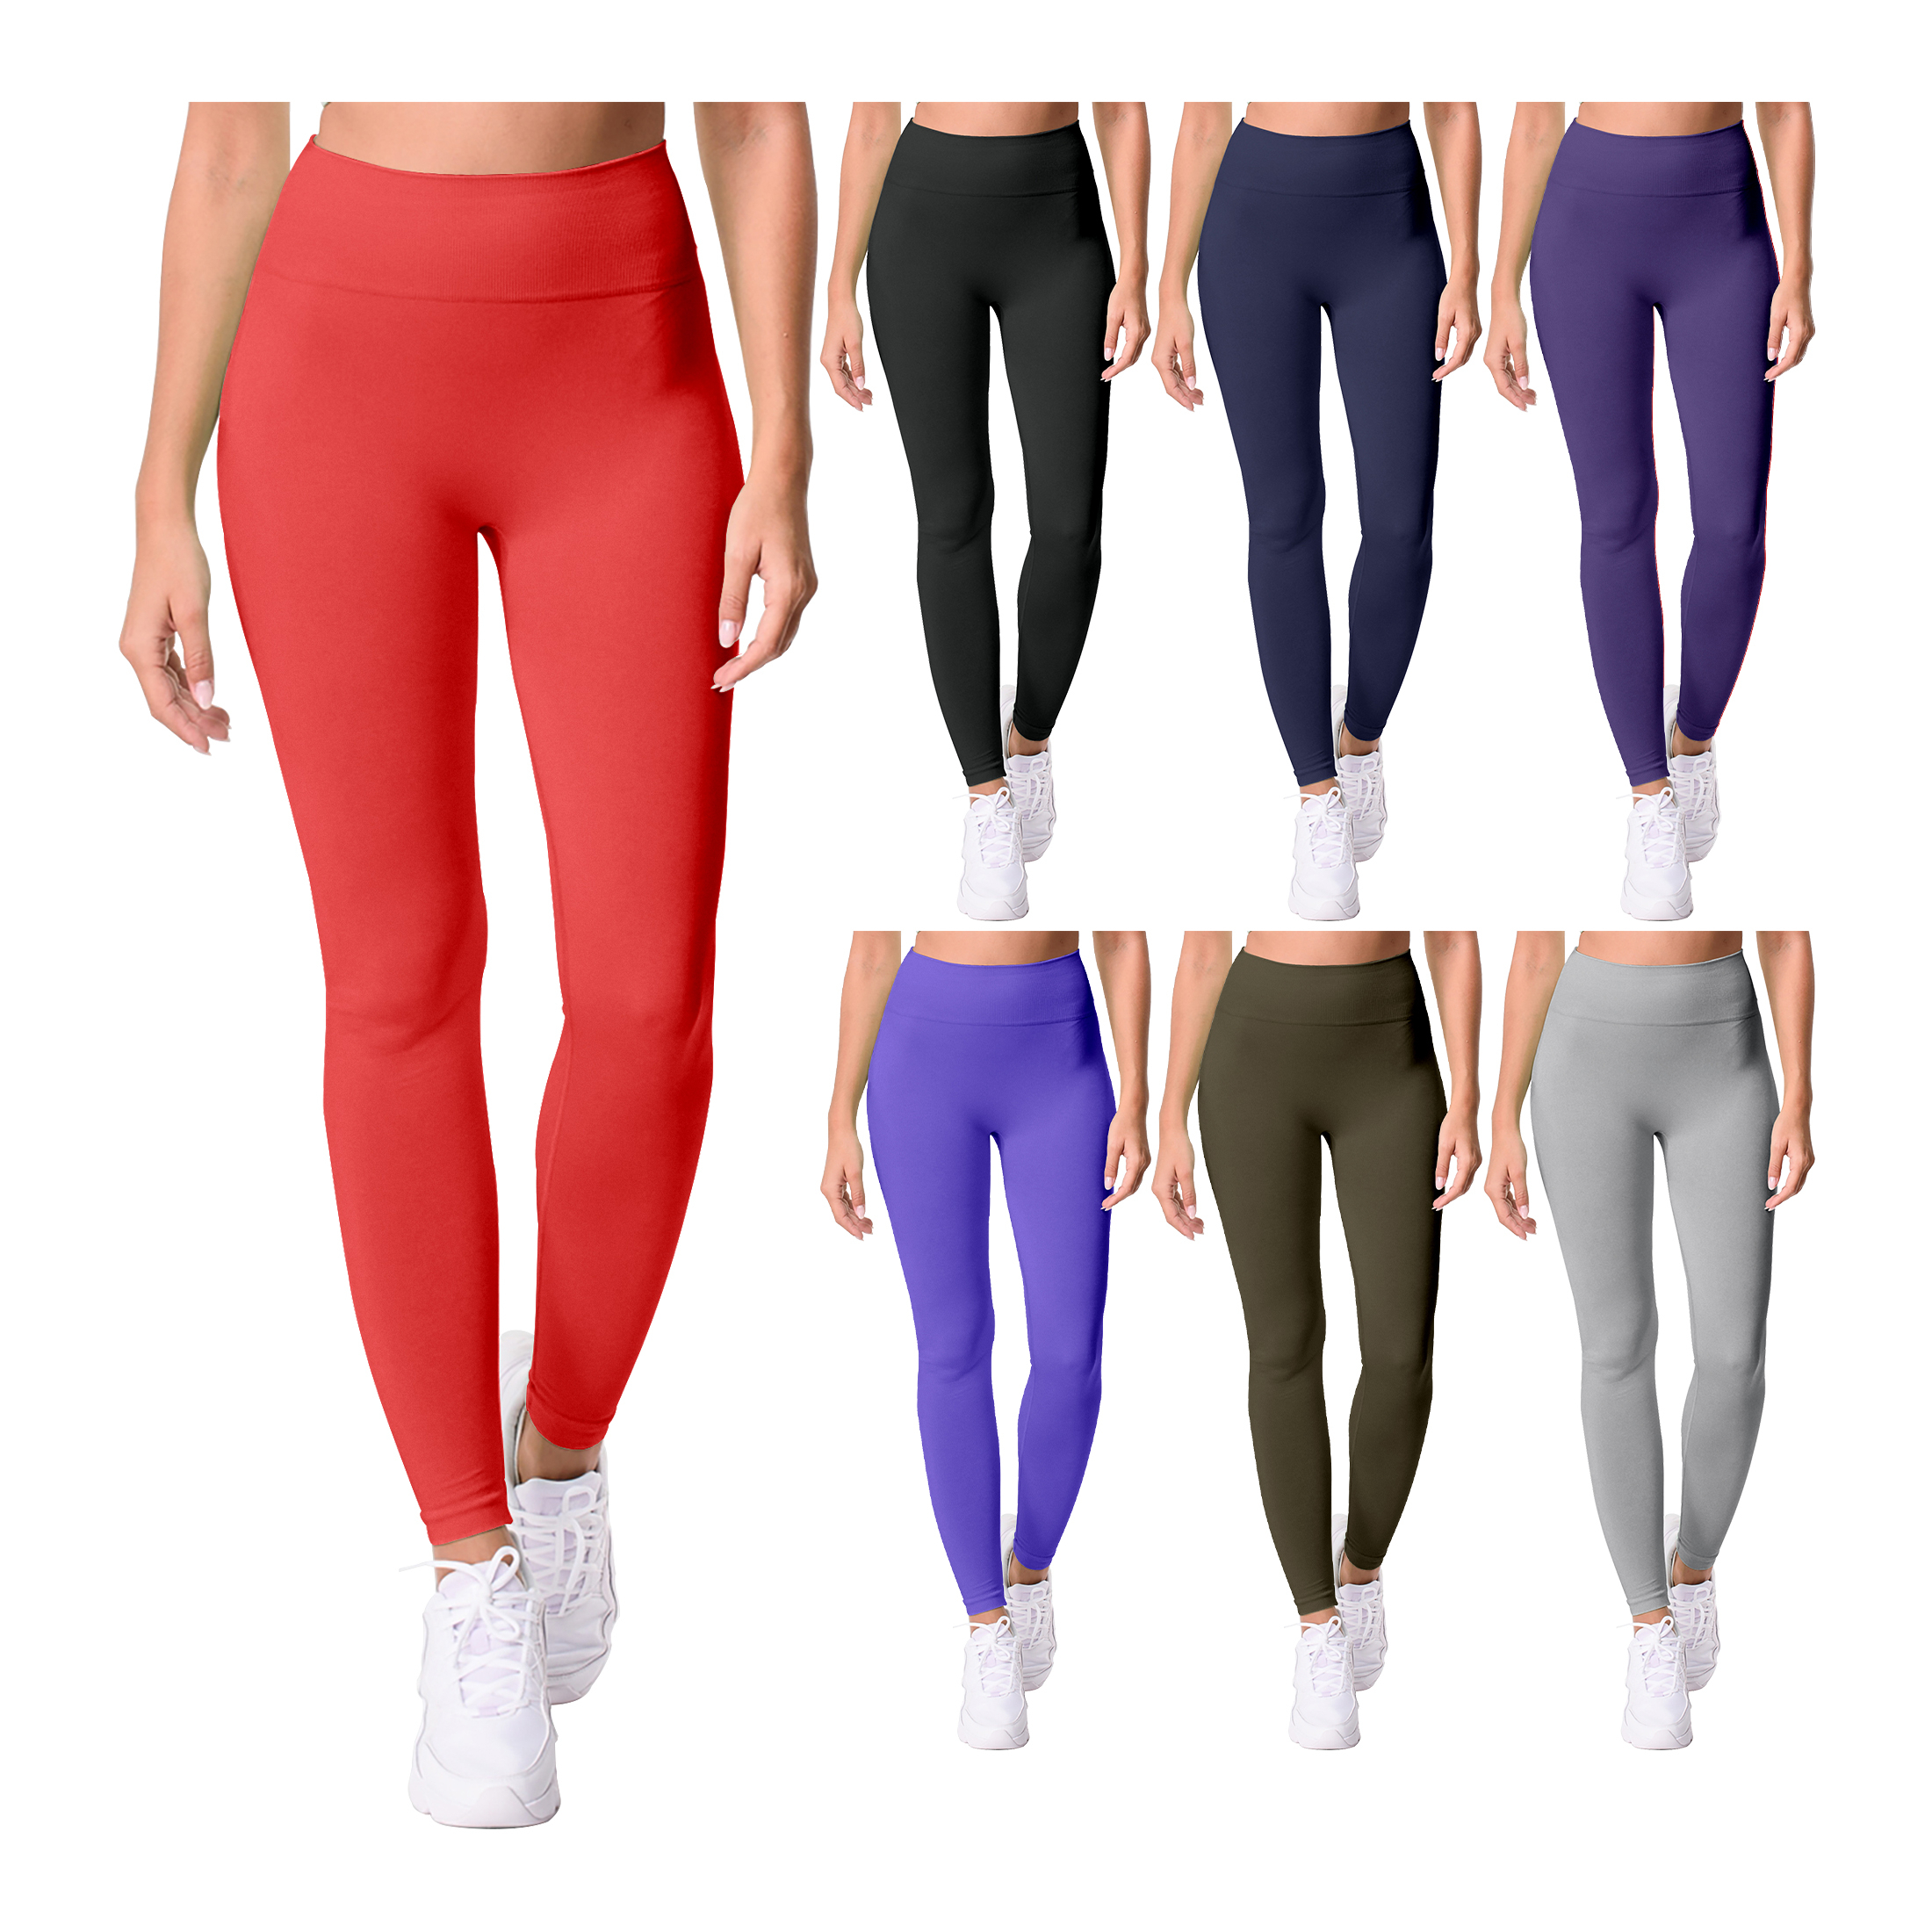 6-Pack: Women's Cozy Fleece-Lined Workout Yoga Pants Seamless Leggings - Assorted, Small